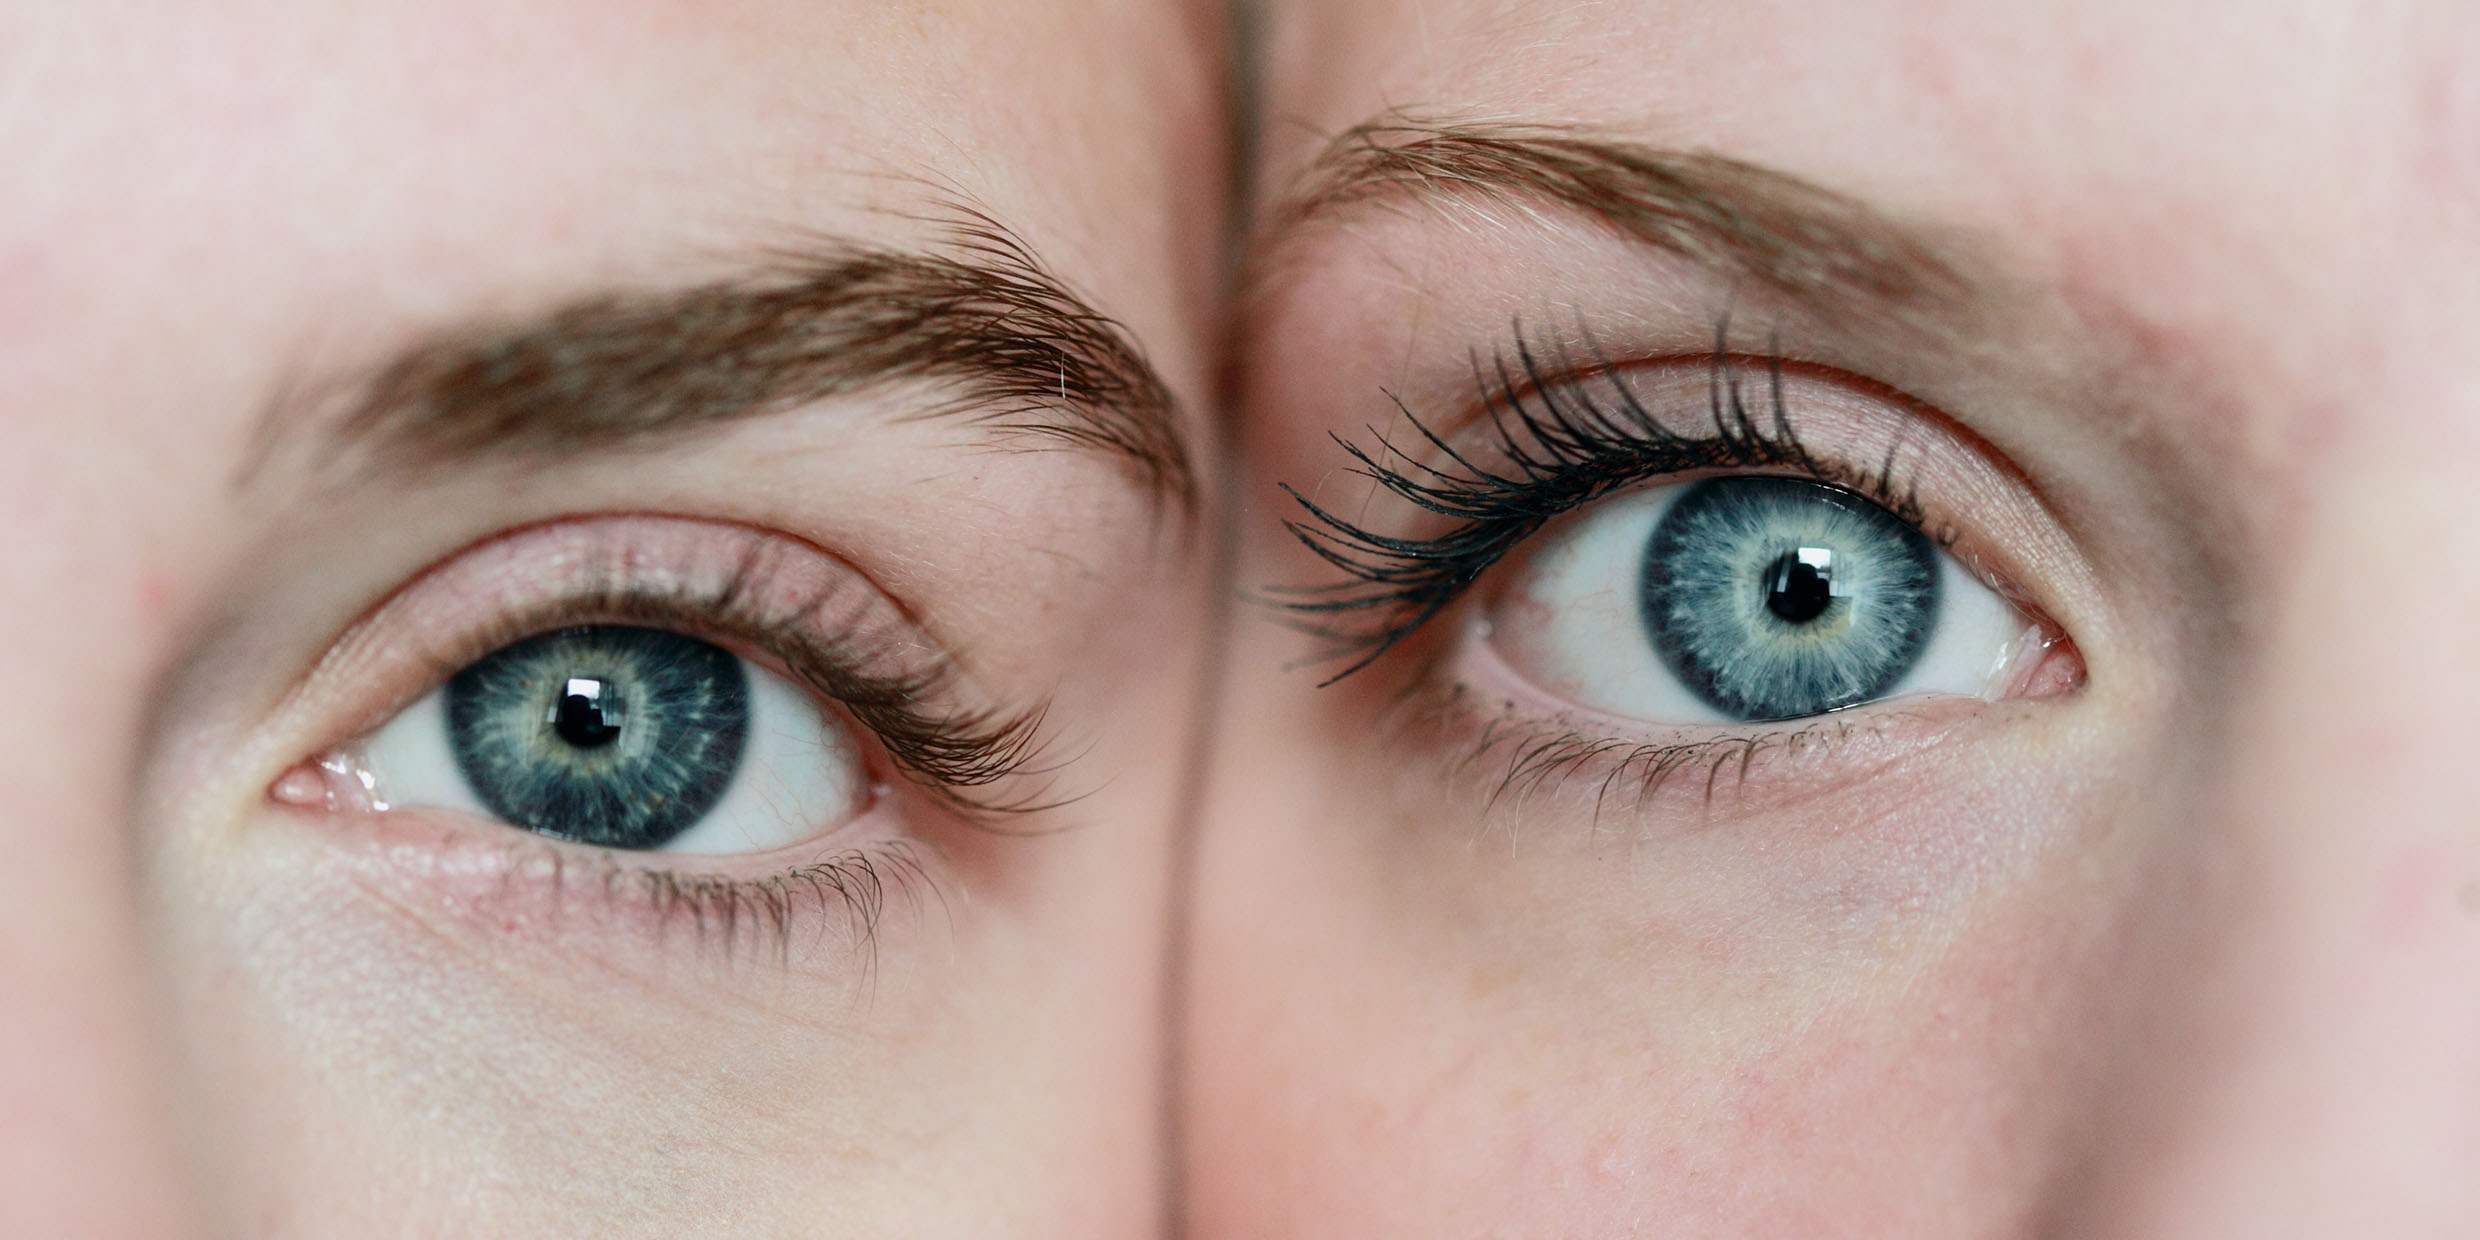 Close up image of the eyes of two similar-looking women